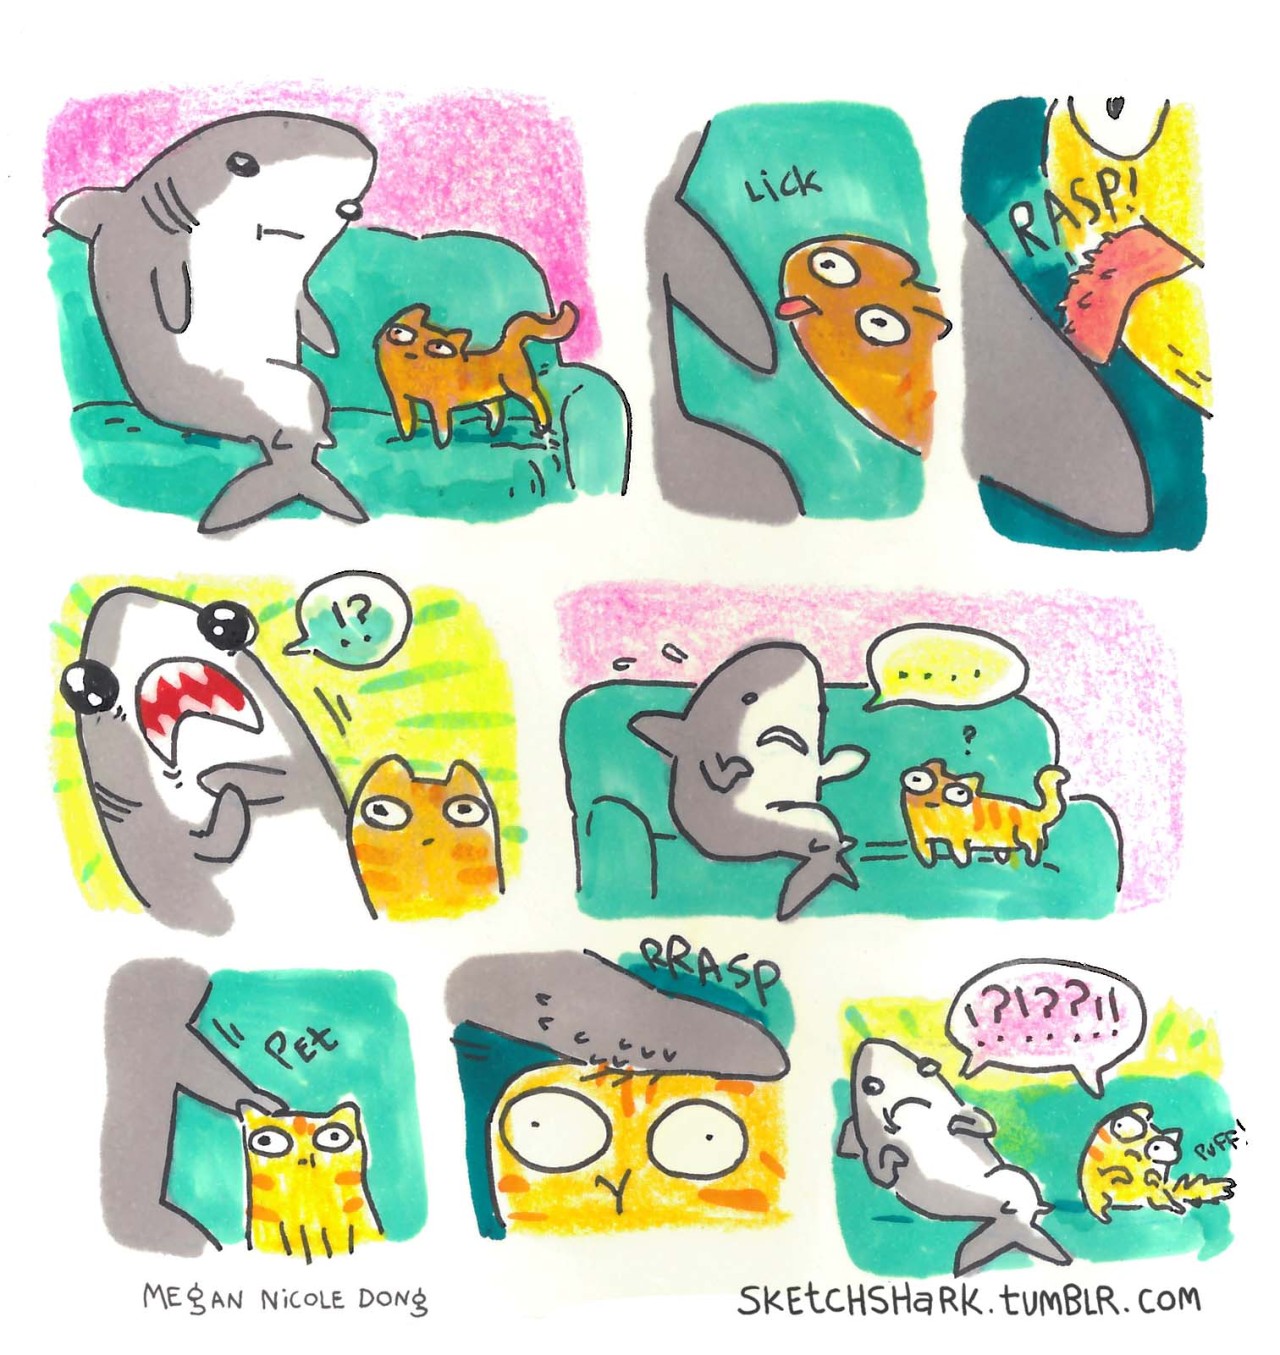 sketchshark:  I’ve been doodling comics about the off-screen life of Bruce, who